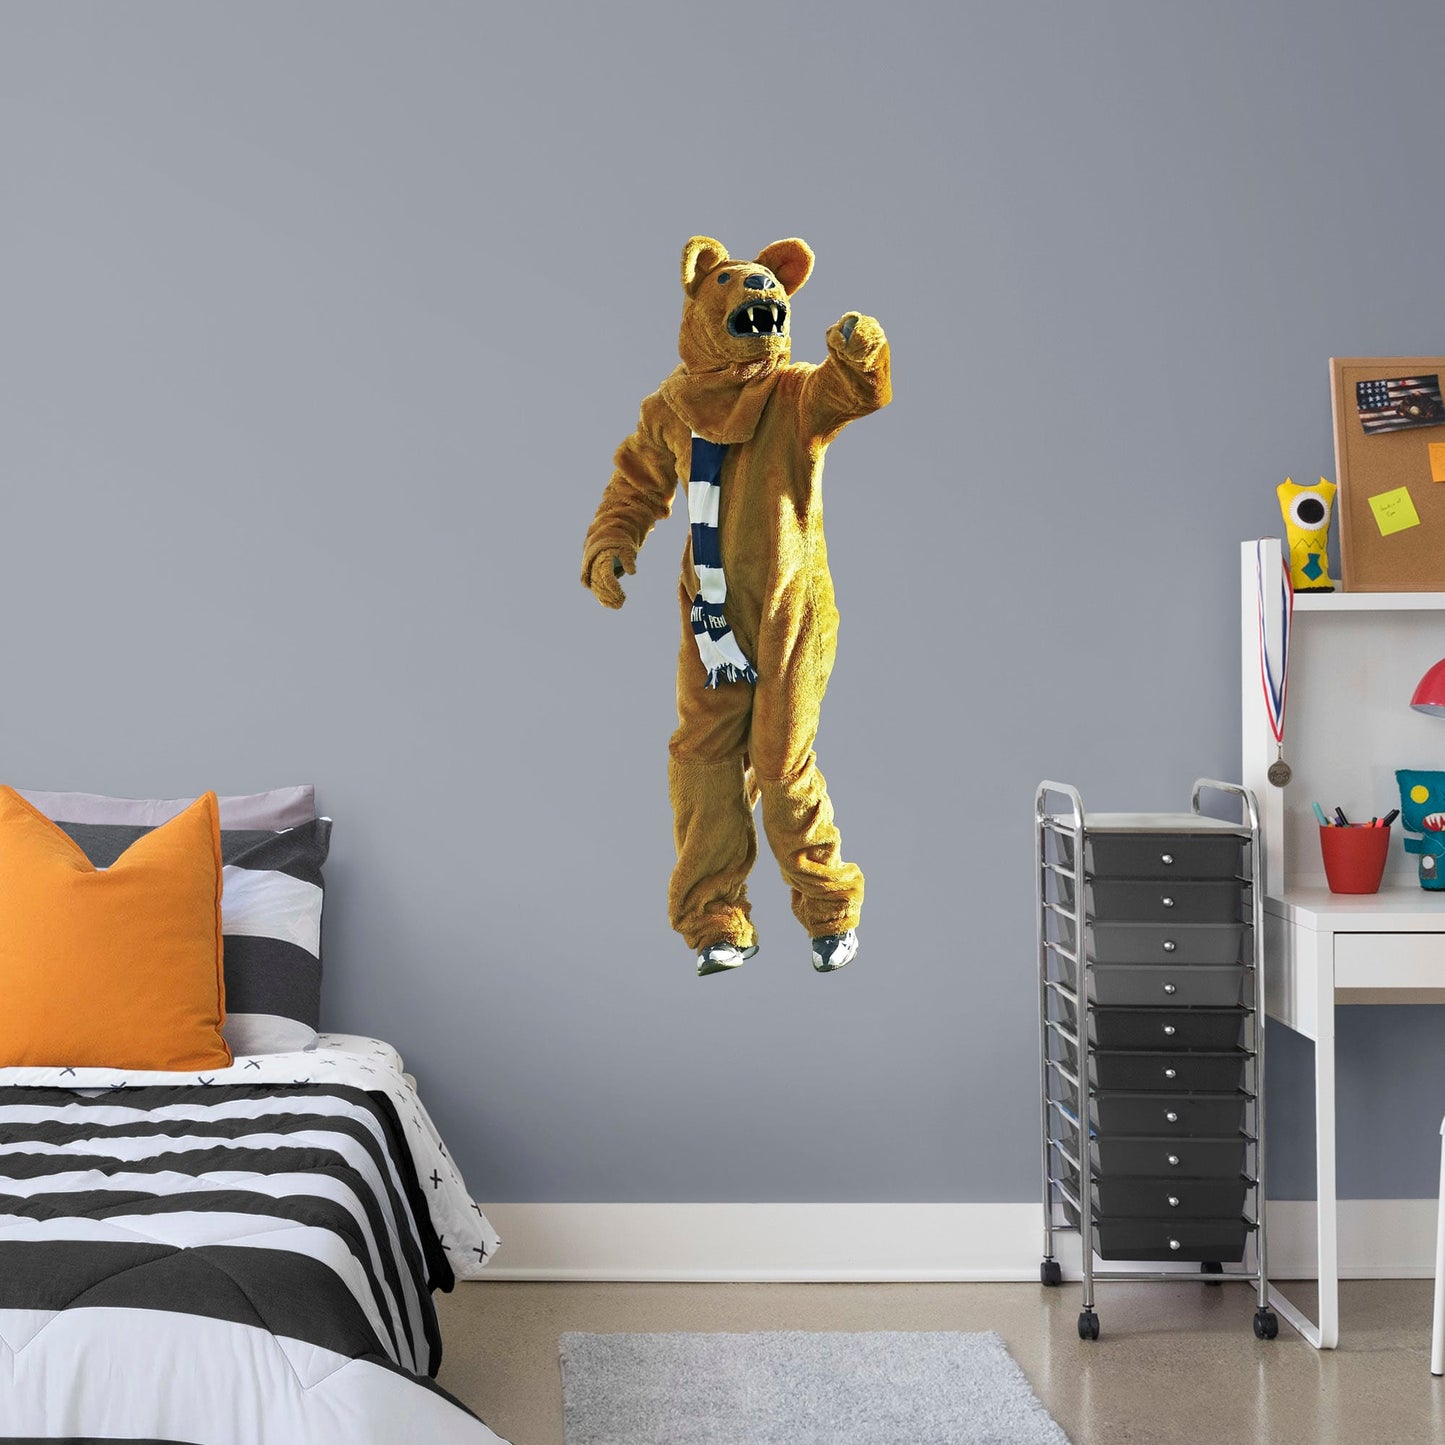 Penn State Nittany Lions: Nittany Lion Mascot - Officially Licensed Removable Wall Decal